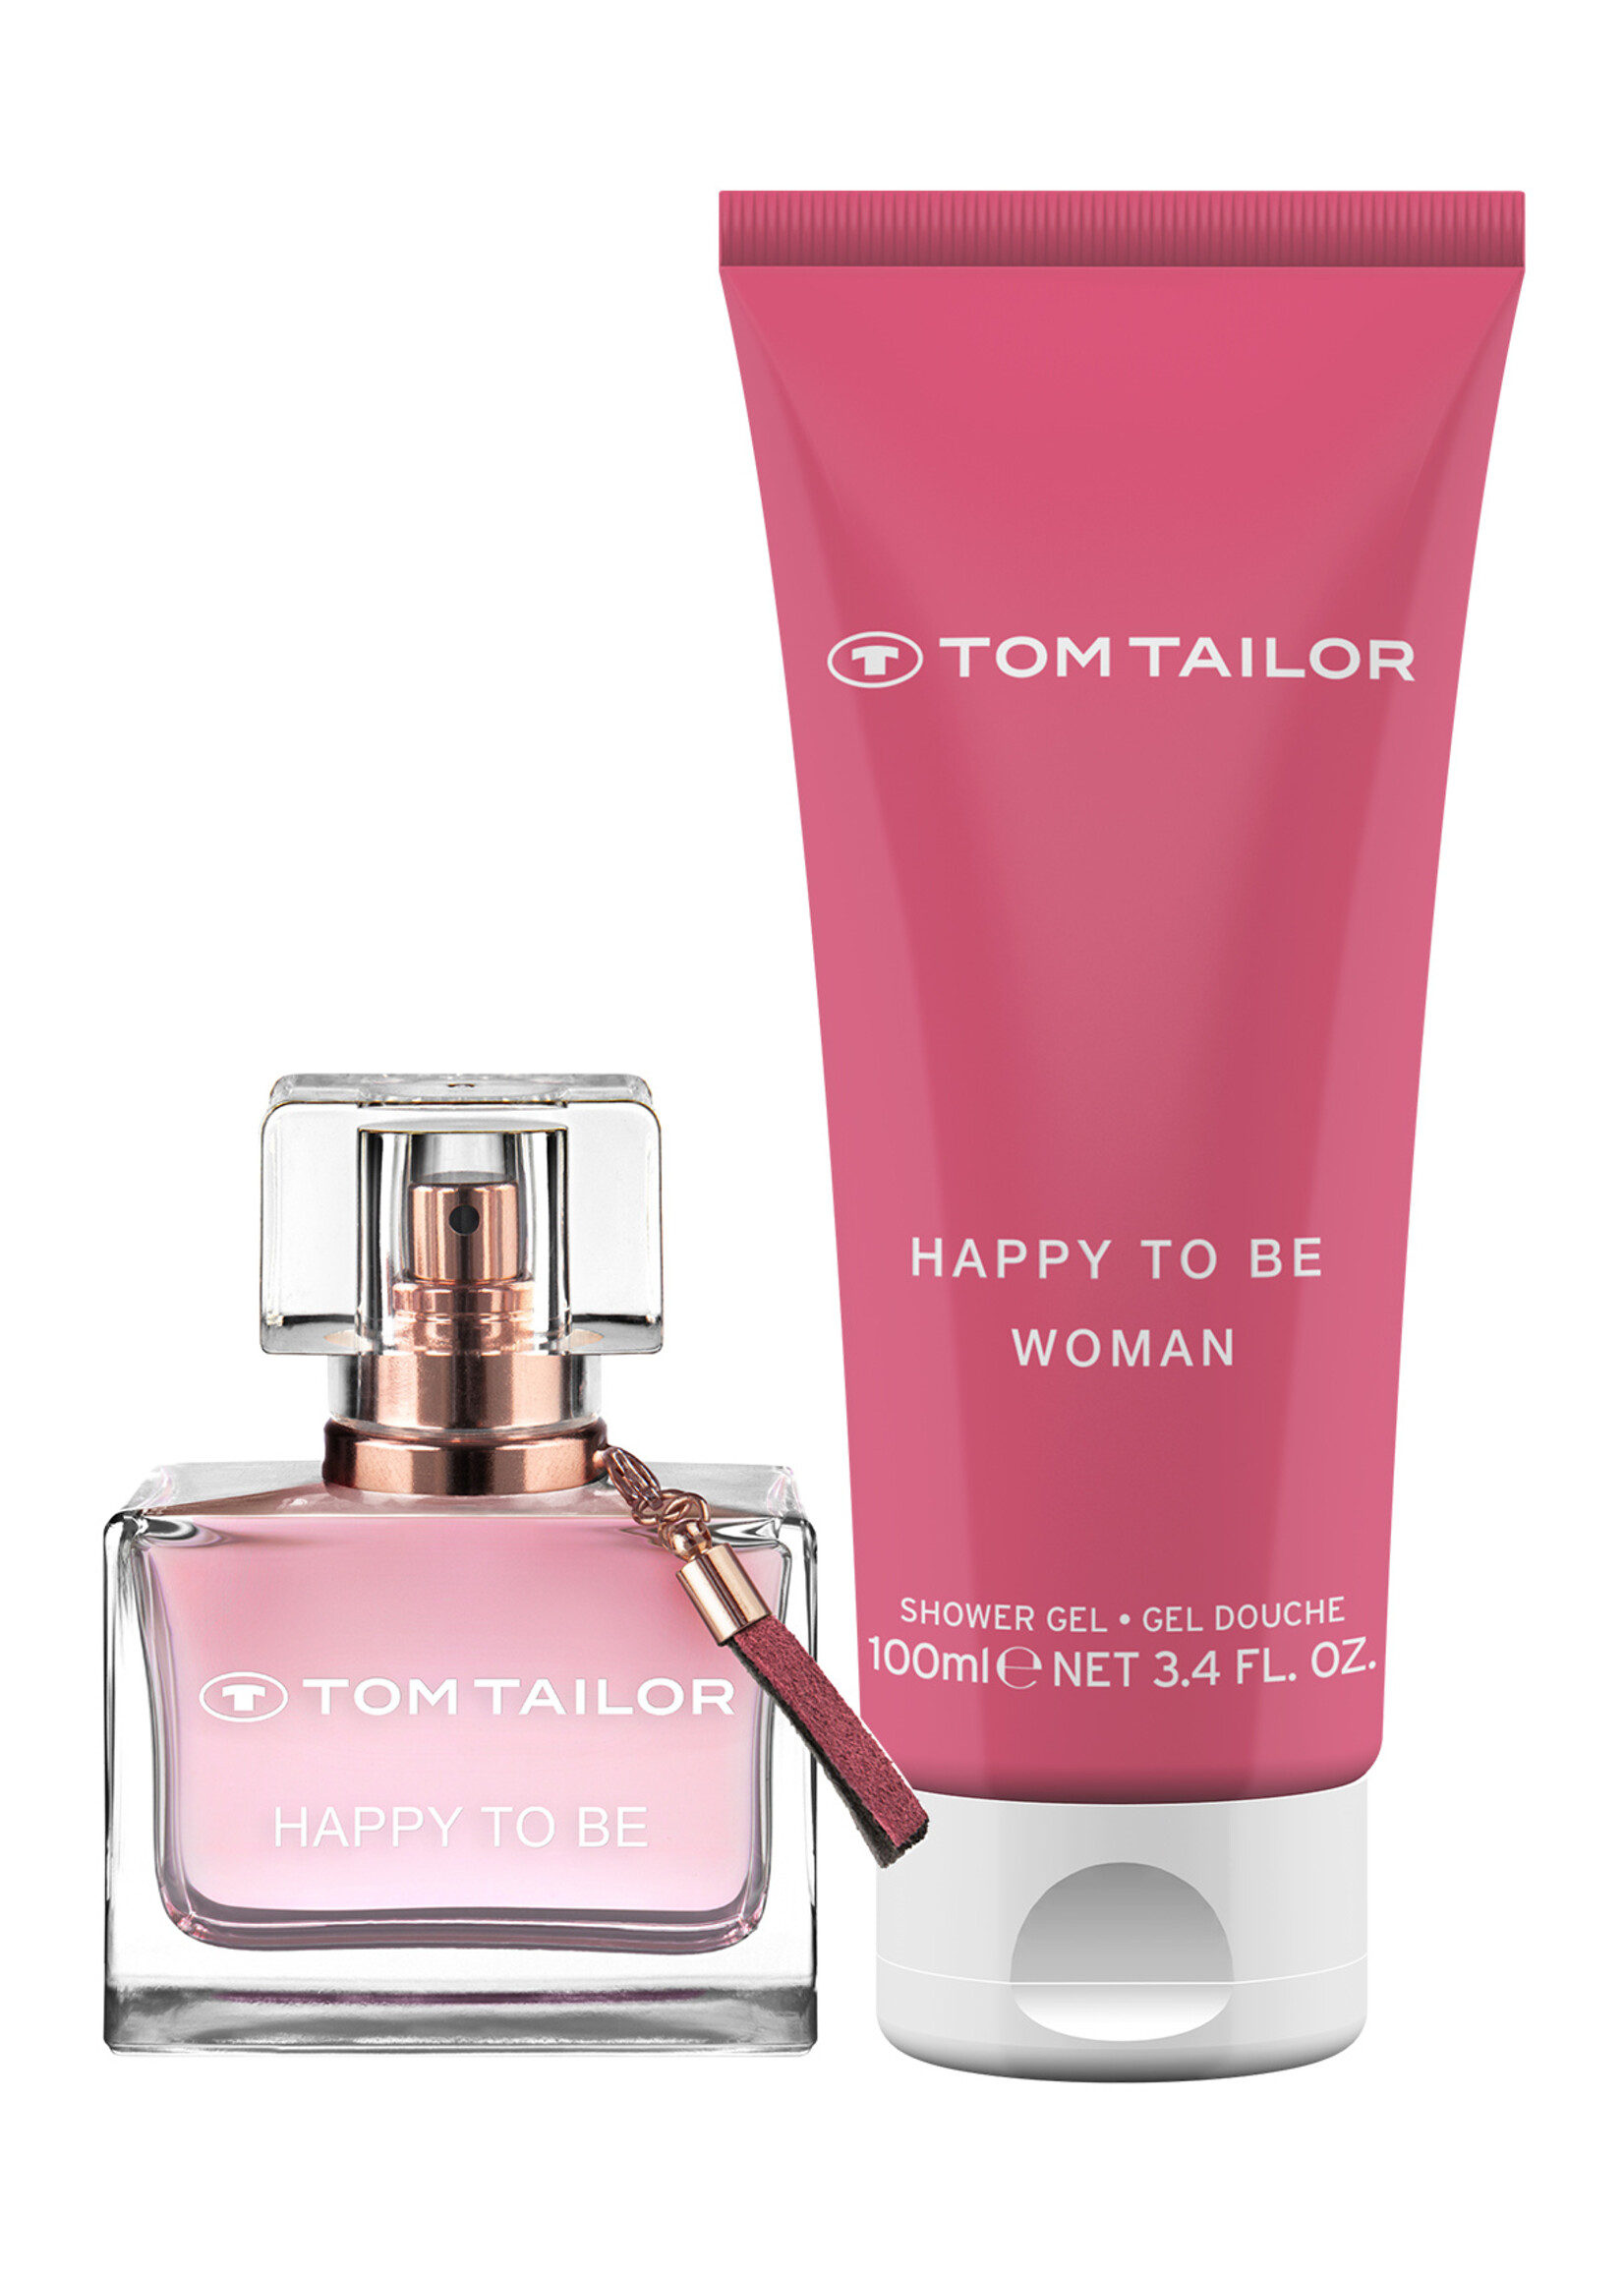 Tom Tailor Happy to Be for her Giftset  Eau De Toilette 30ML + Shower Gel